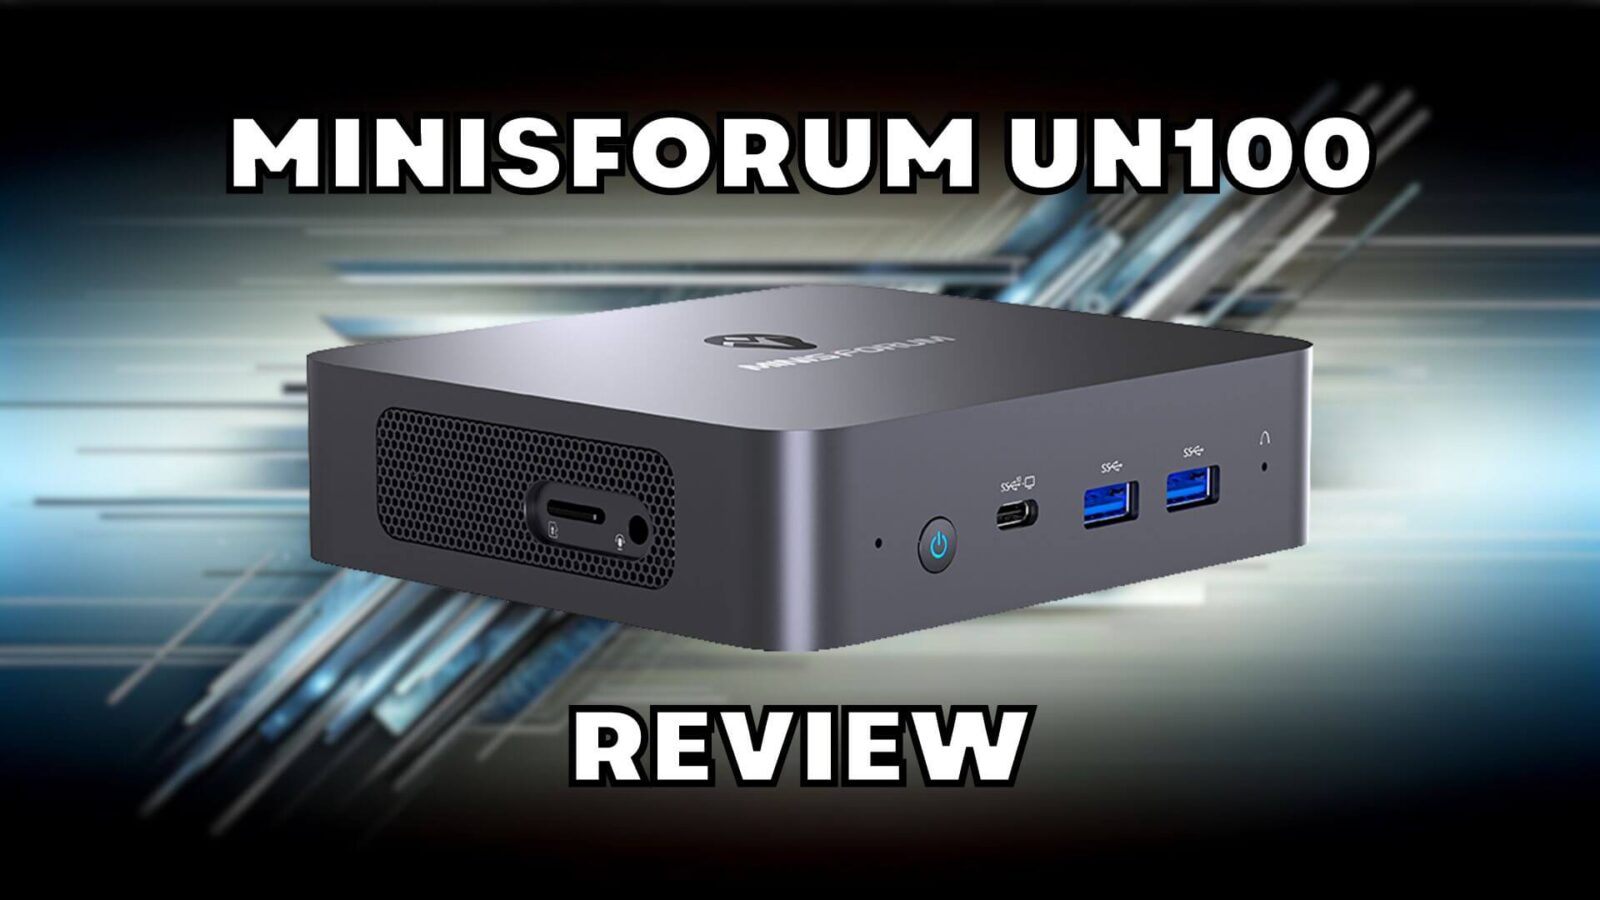 Minisforum UN100 review - High performance low power mini pc for the home and office